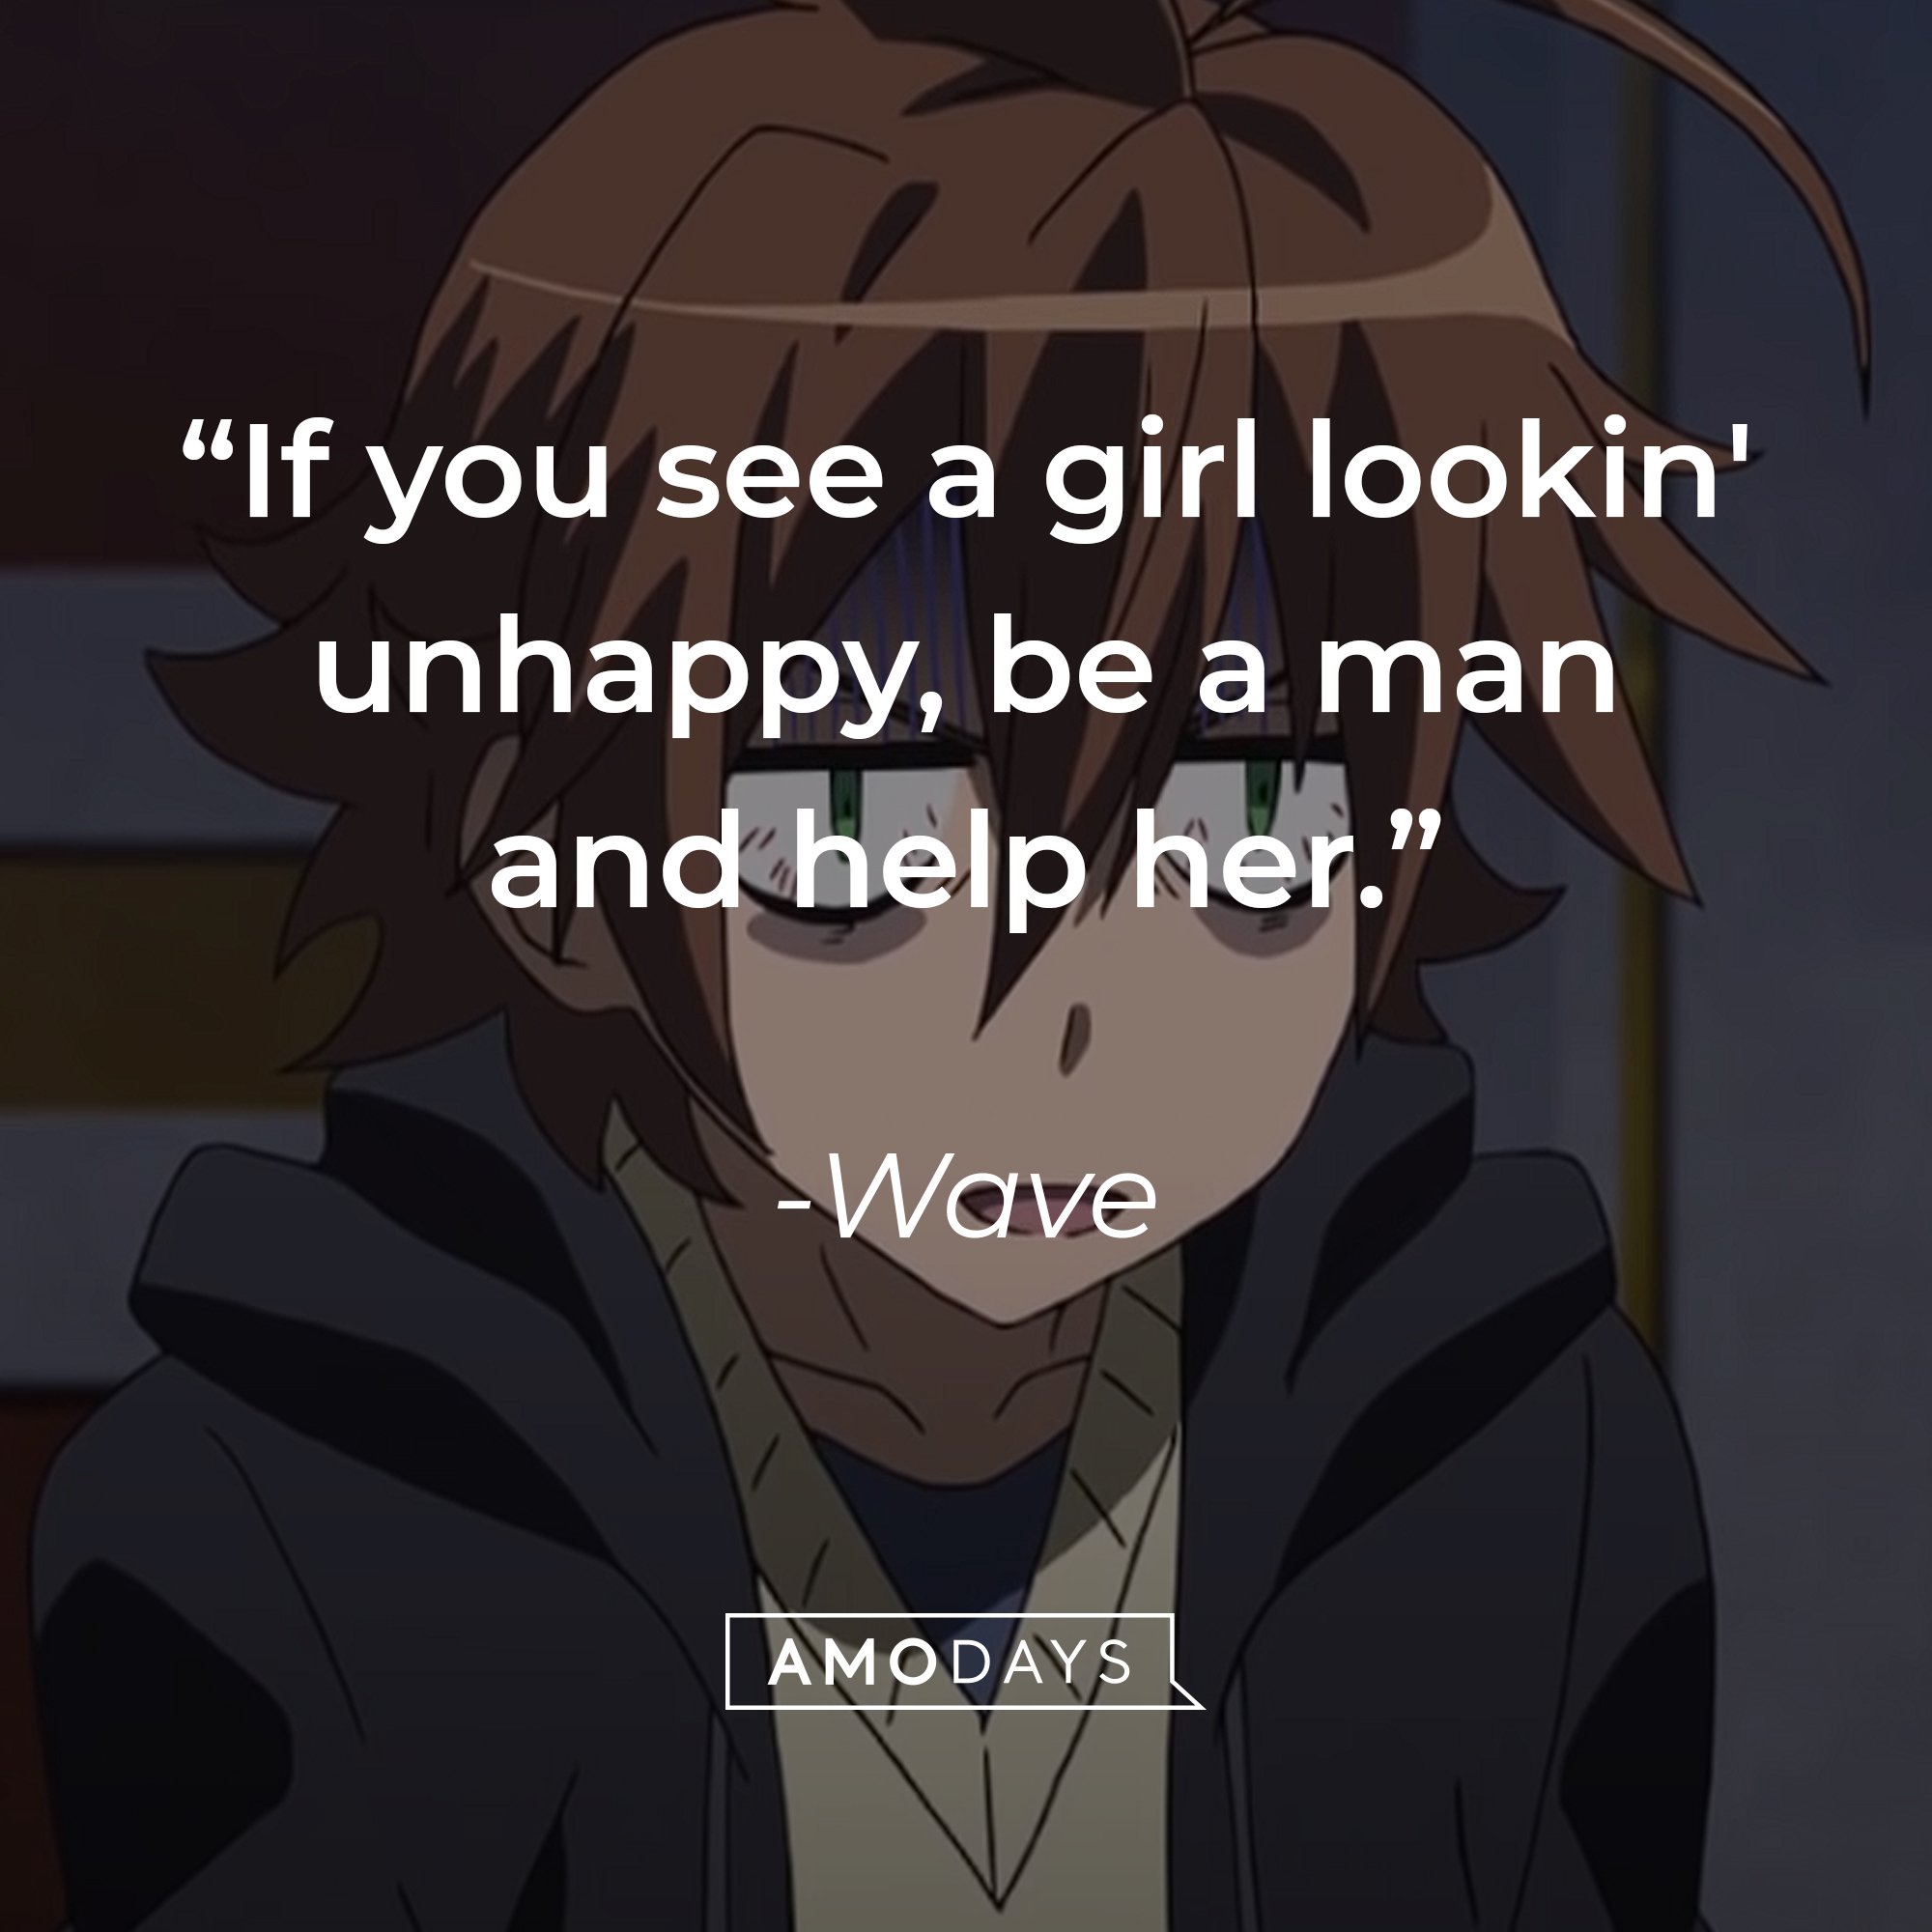 Wave’s quote: “If you see a girl lookin' unhappy, be a man and help her.” | Image: AmoDays